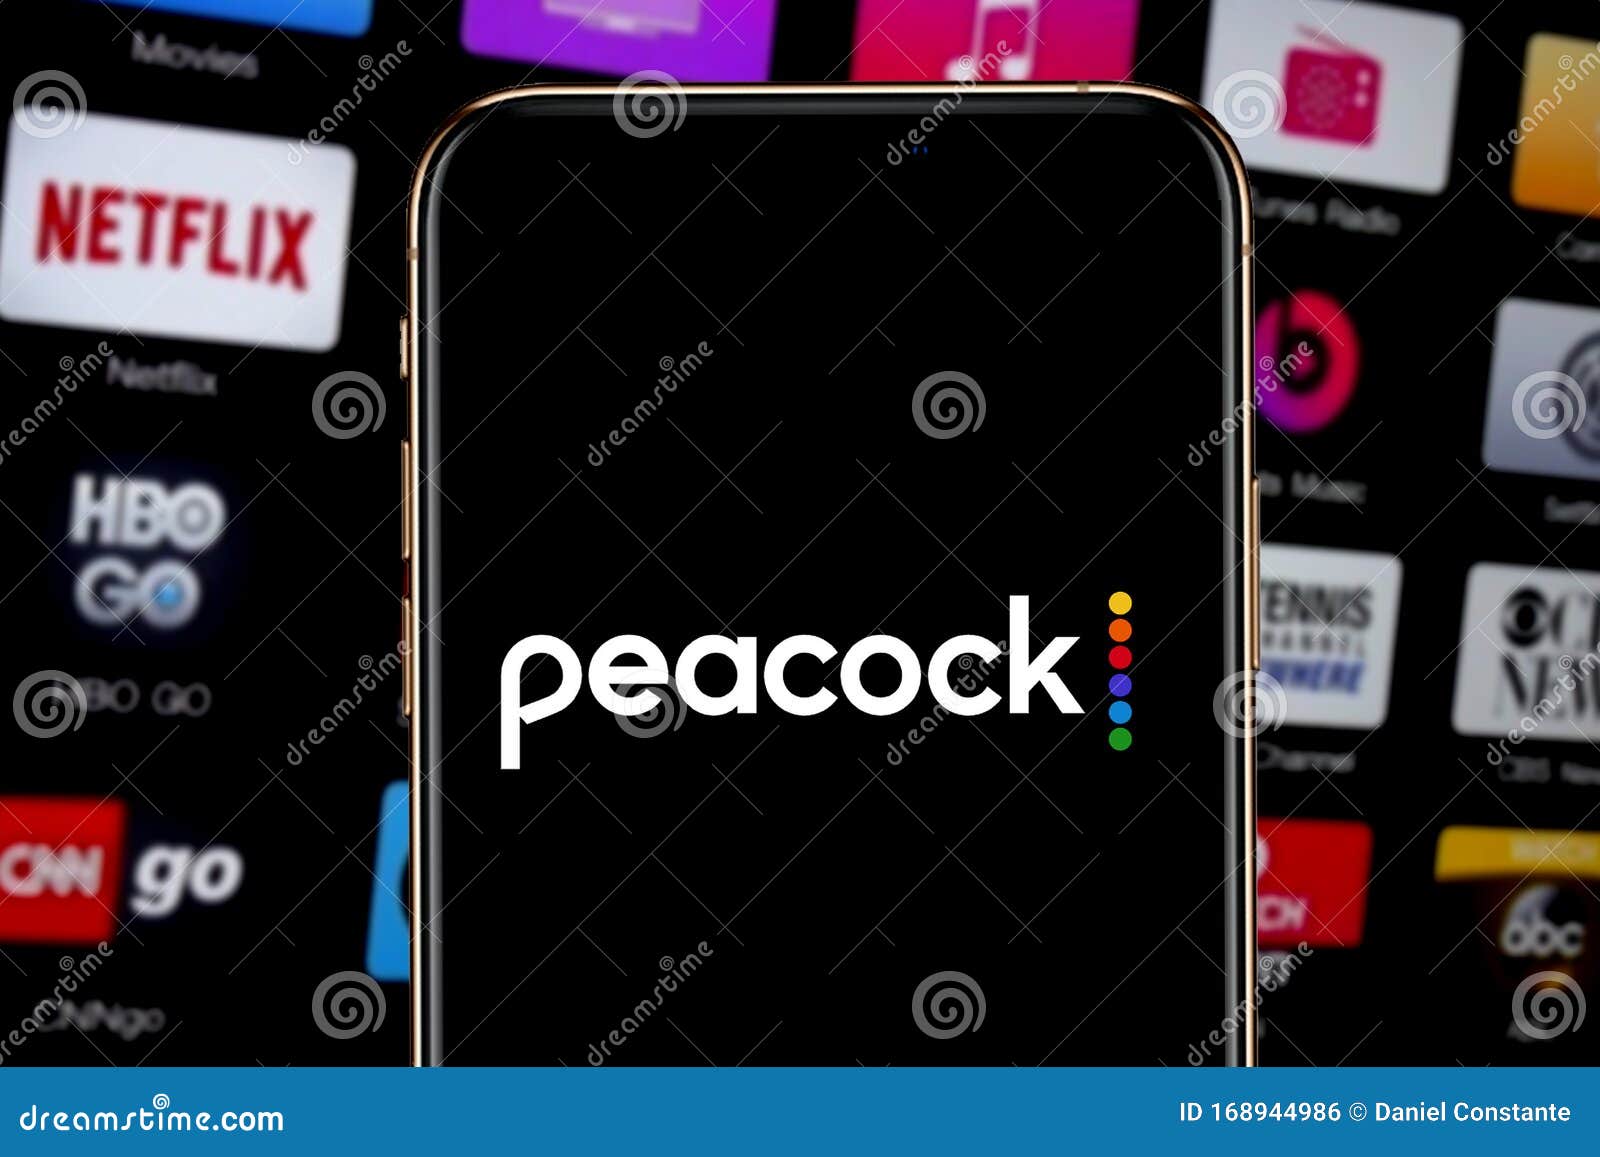 Iphone 11 Pro with the Peacock Logo and Netflix Which is an Upcoming Video on Demand Service